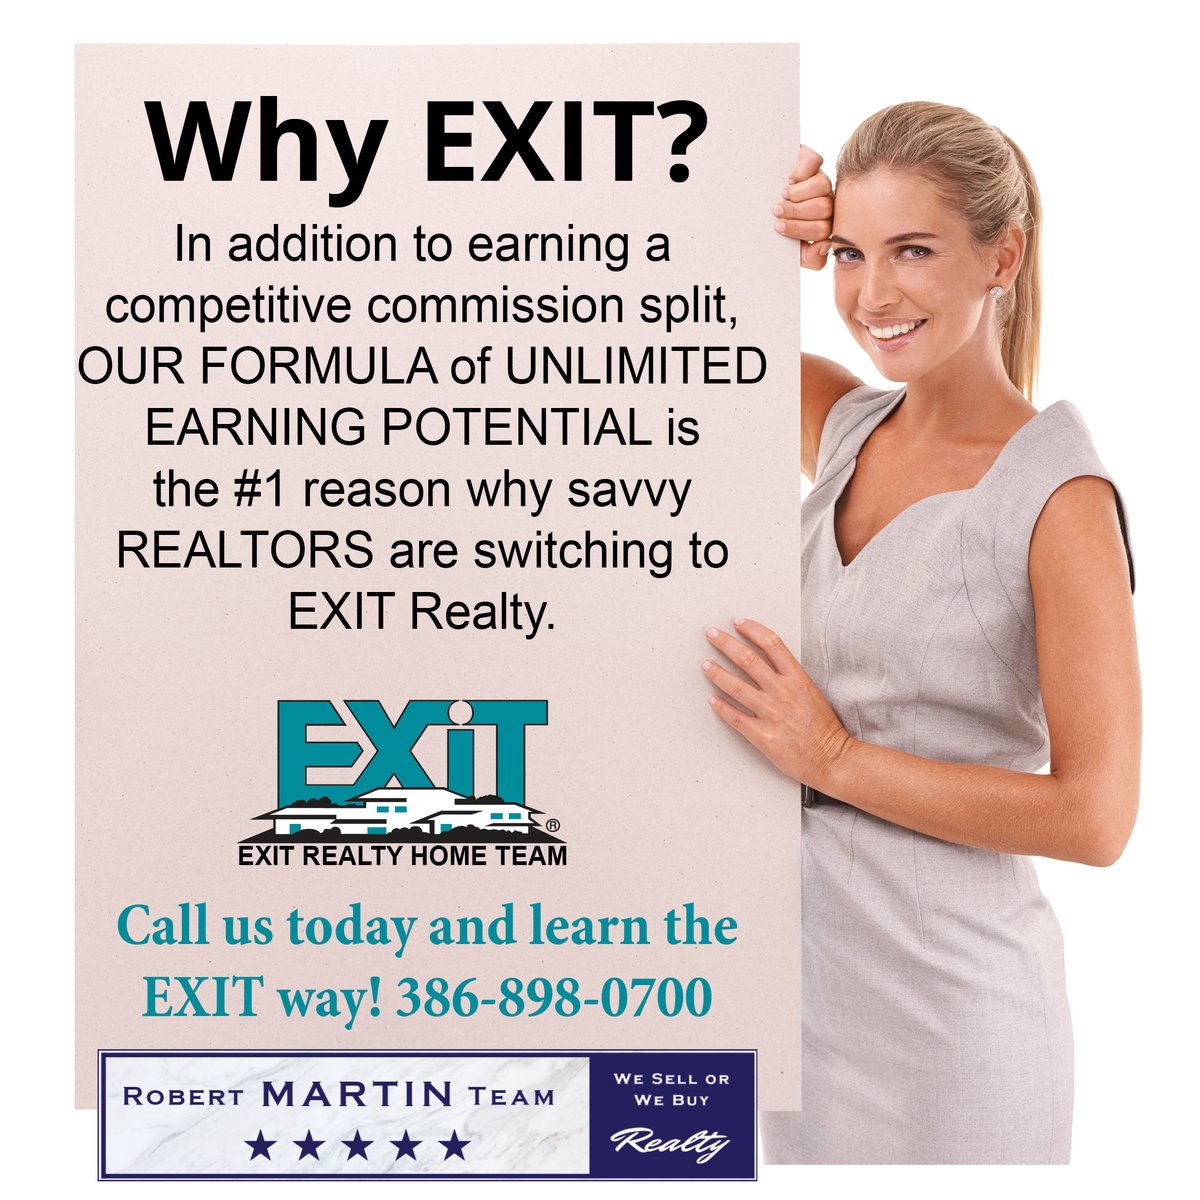 Looking for a new brokerage? Here's why you should choose EXIT!

Call or text 386-898-0700 today to learn more about the EXIT Way.

#EXITRealtyHomeTeam #DaytonaBeachHomes #DaytonaBeaachRealEstate #HomesForSale #LuxuryHomes #WaterfrontHomes #LovEXIT #EXITRealty #curbappeal...